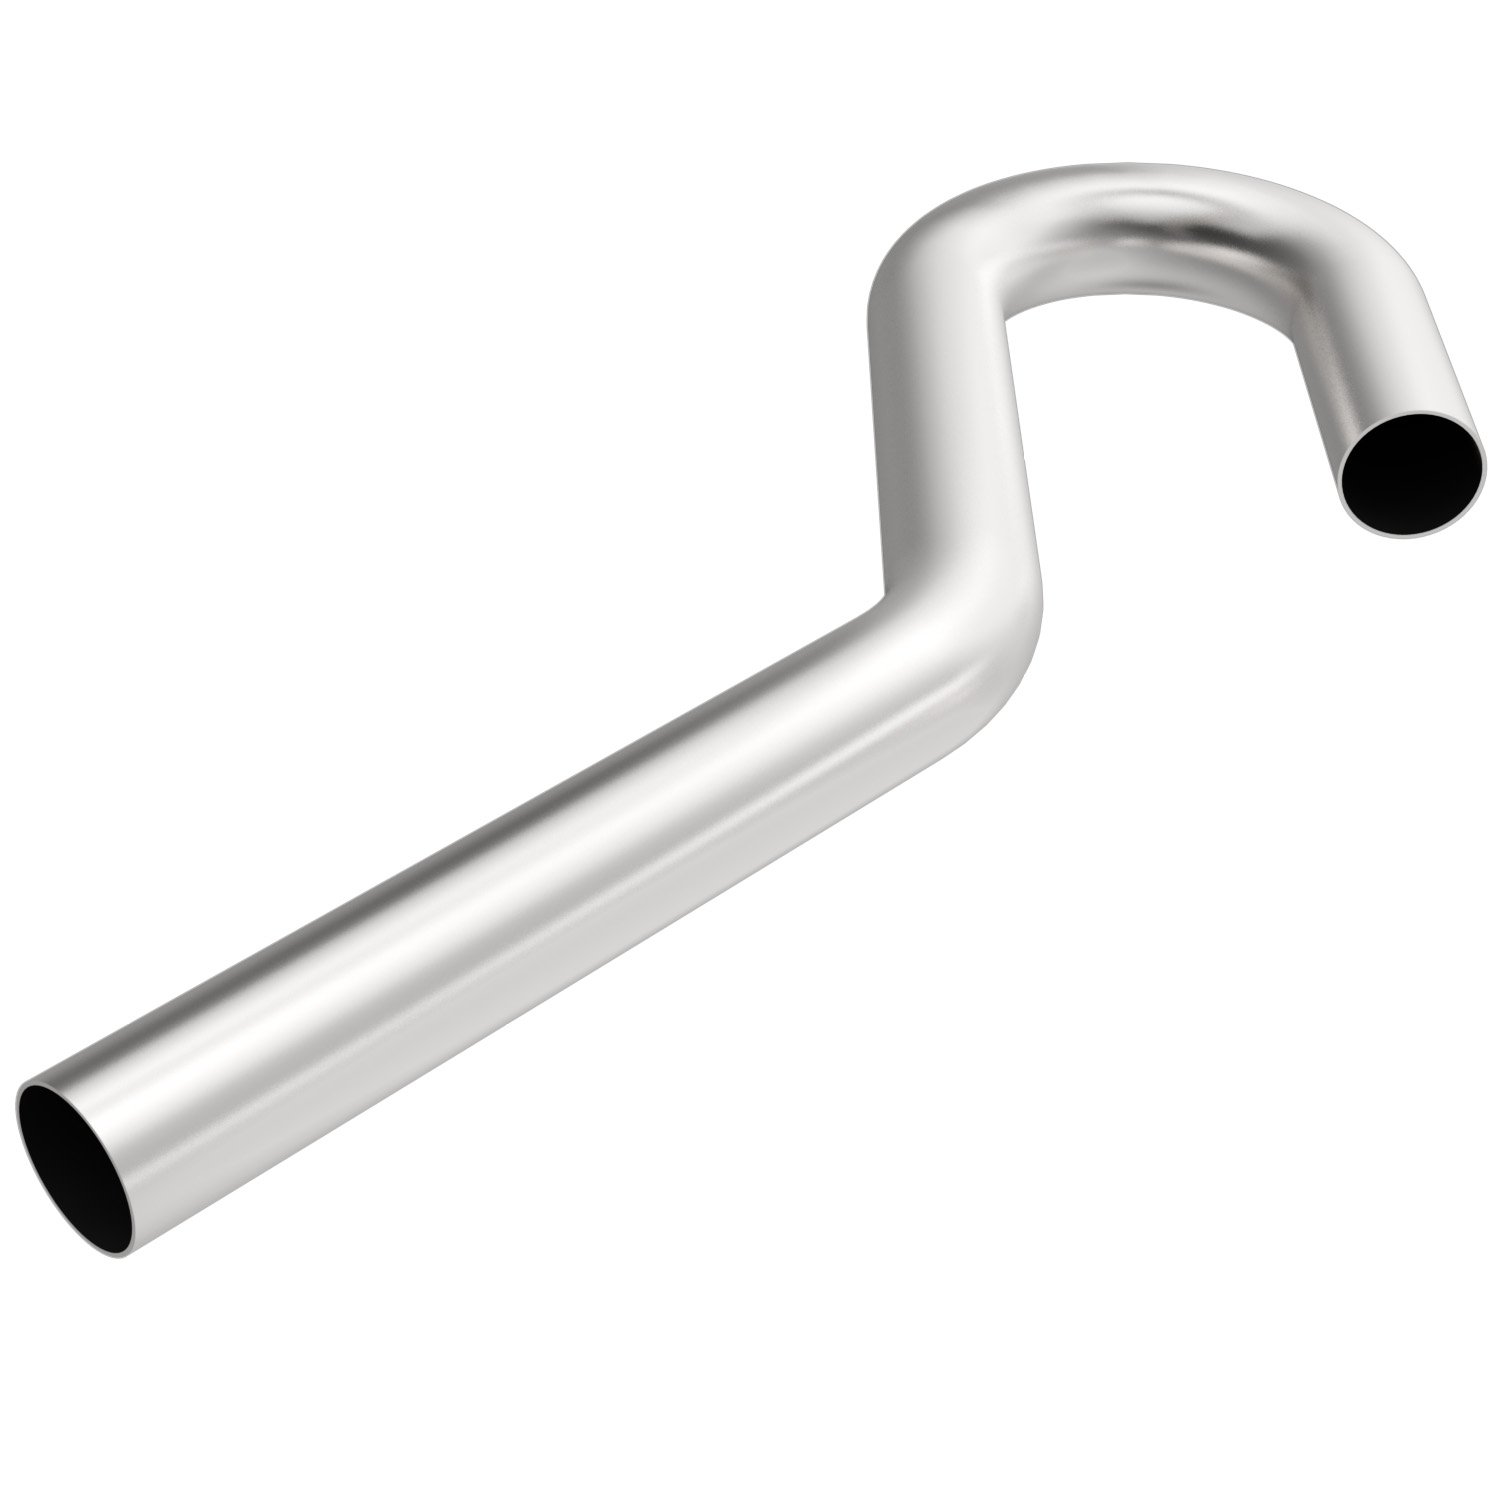 Stainless Steel 3-in-1 Transition Exhaust Pipe With 45°/90°/180° Bends